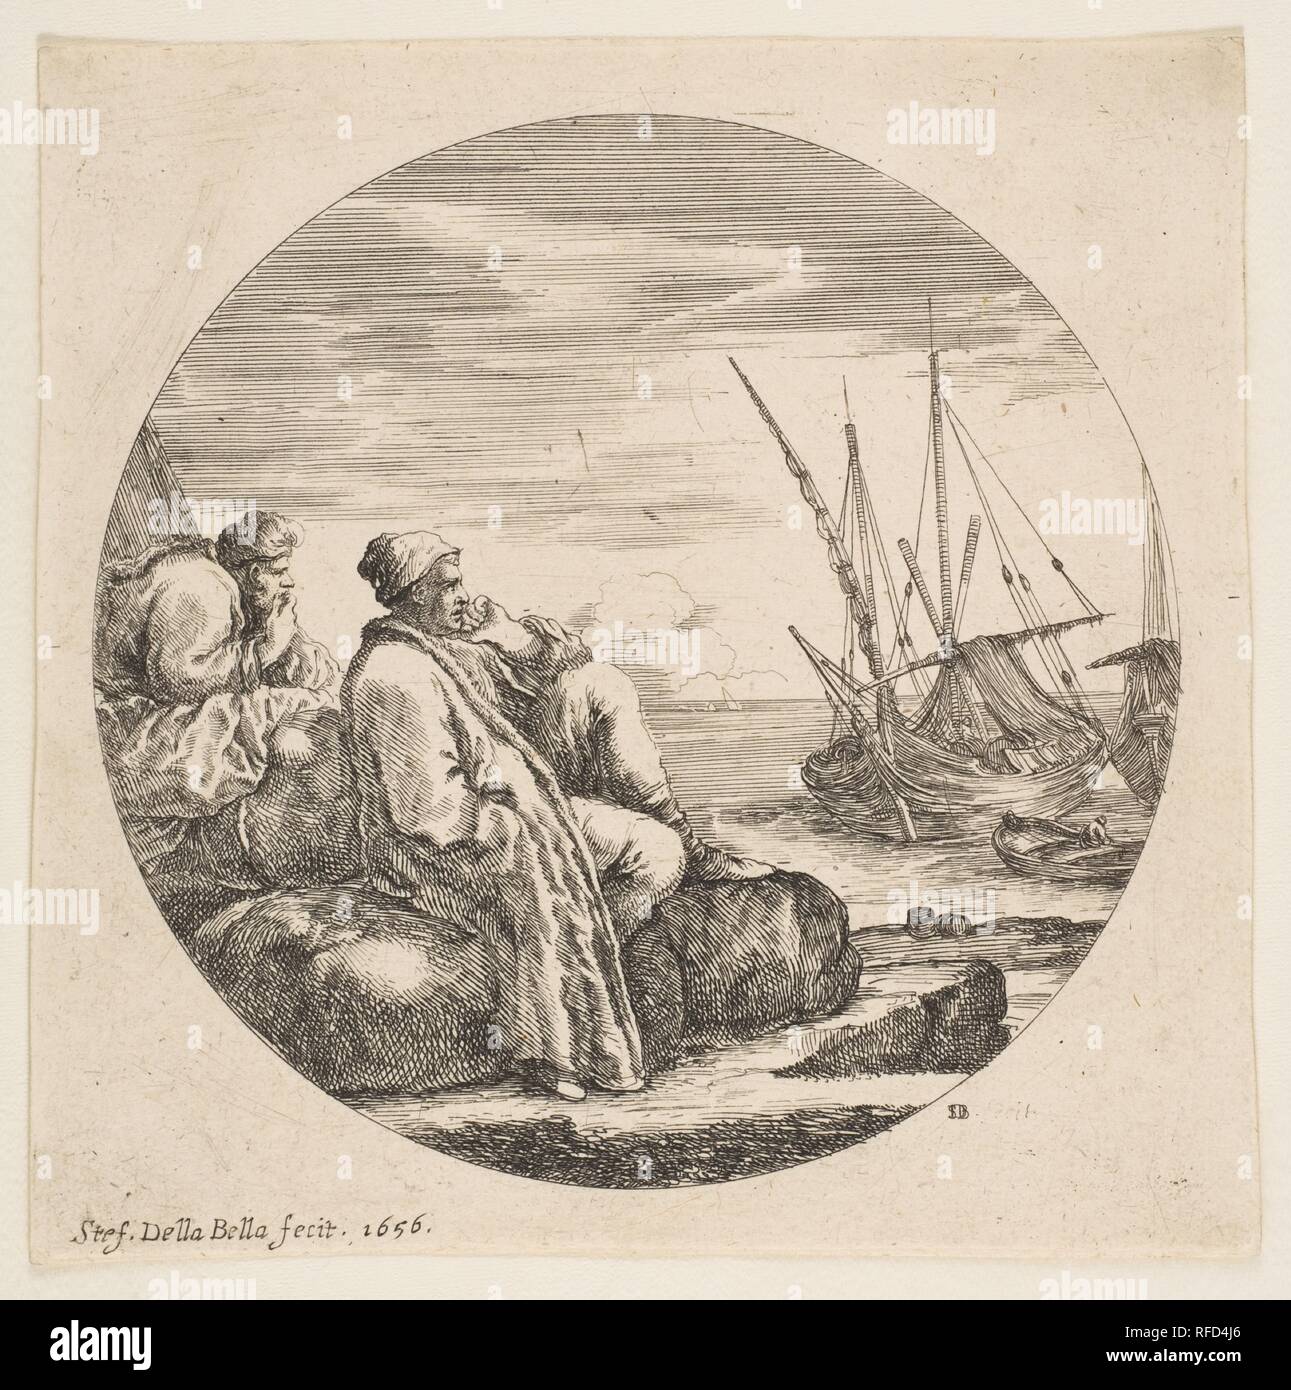 Two Turkish Merchants in a Port, from 'Landscapes and seaports' (Paysages et ports de mer, dans des ronds). Artist: Stefano della Bella (Italian, Florence 1610-1664 Florence). Dimensions: Sheet (trimmed): 5 1/2 × 5 9/16 in. (14 × 14.1 cm). Series/Portfolio: 'Landscapes and seaports' (Paysages et ports de mer, dans des ronds). Date: 1656. Museum: Metropolitan Museum of Art, New York, USA. Stock Photo